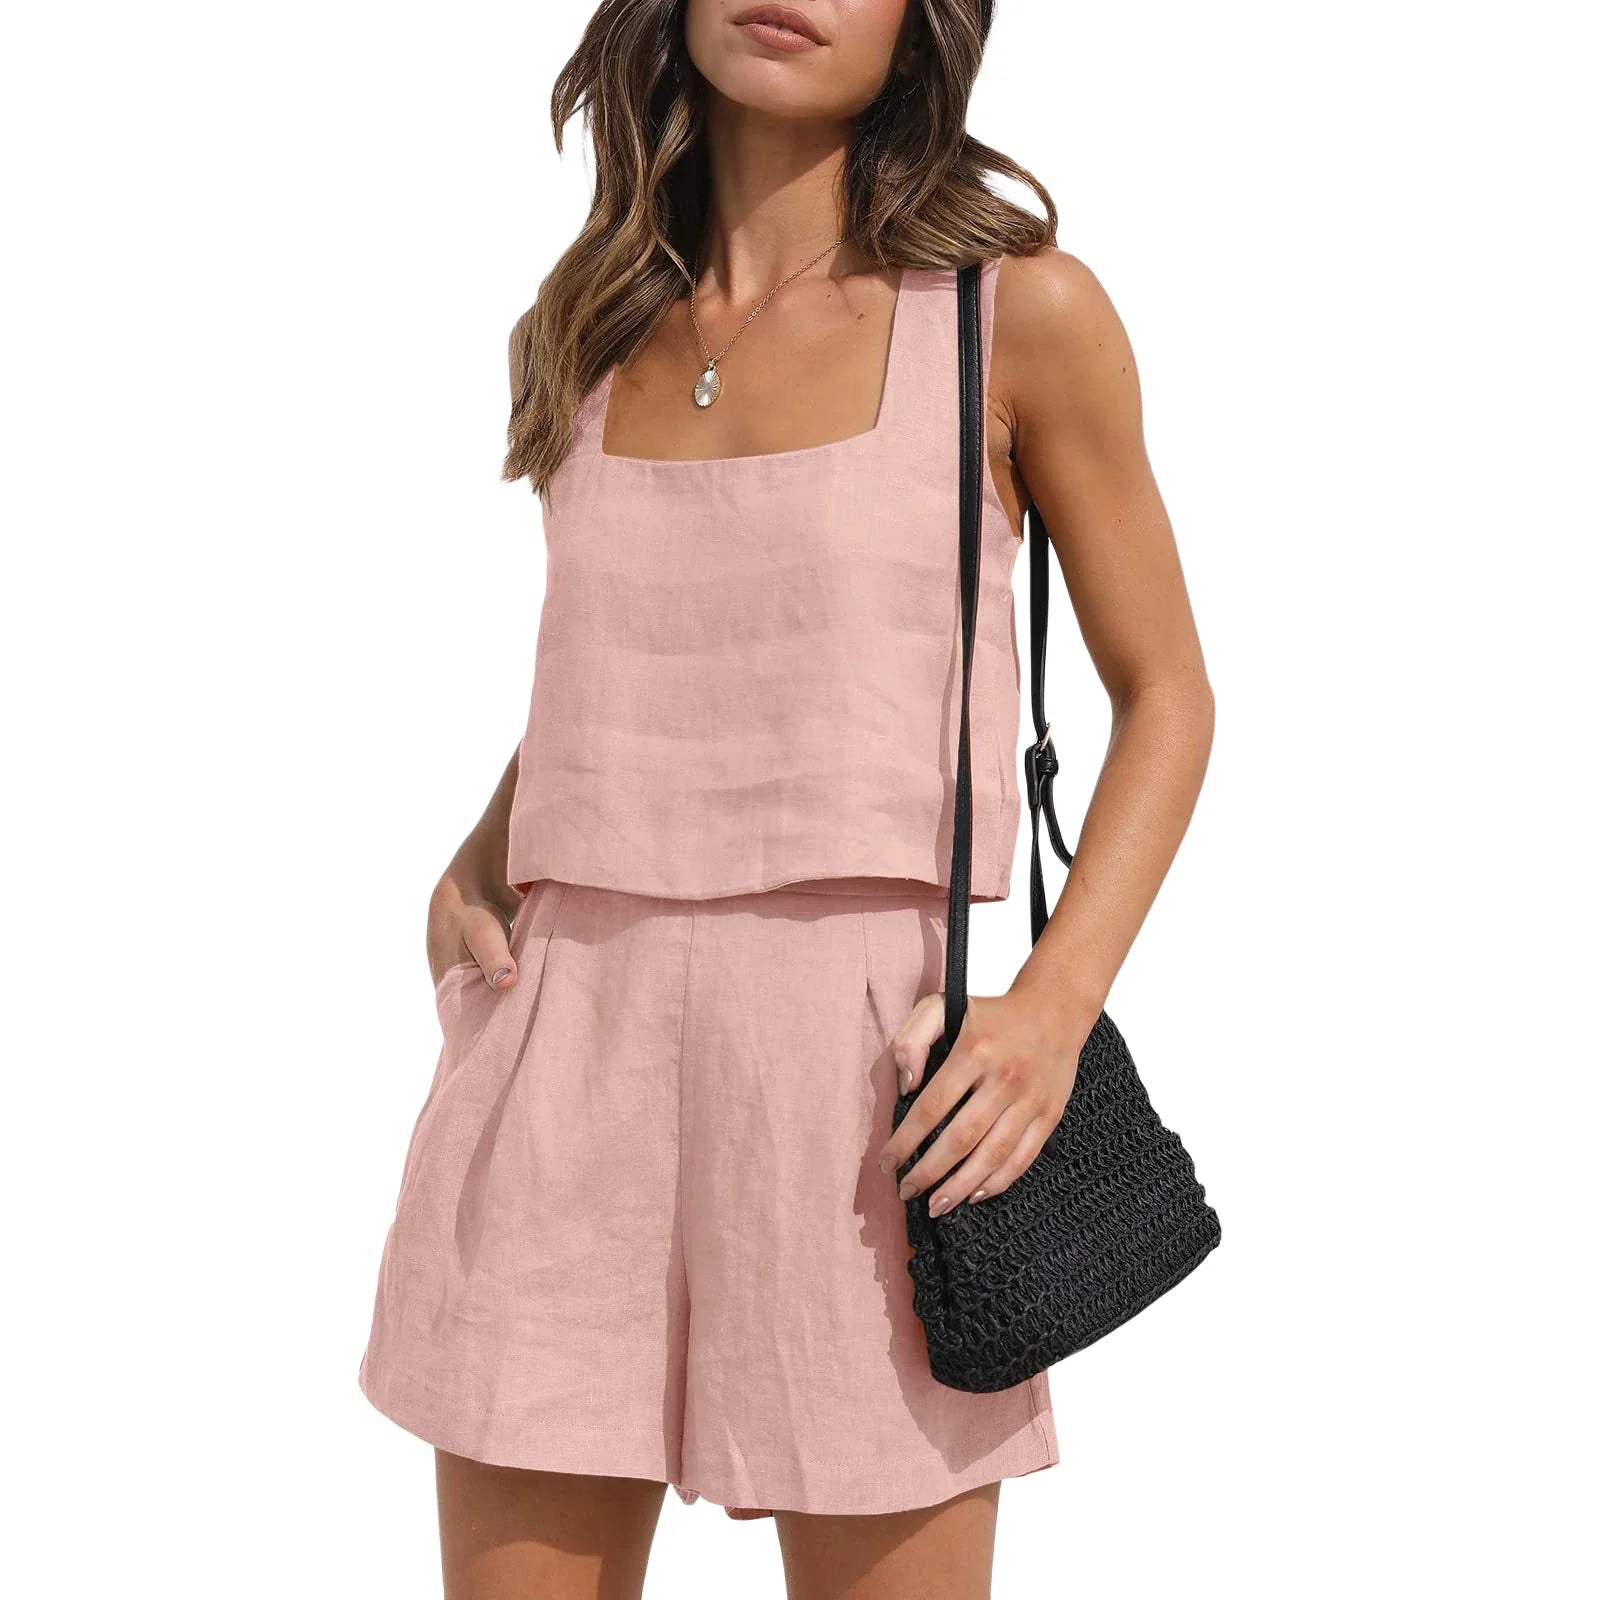 Breezy Linen Two-Piece Set?Sleeveless Top and Shorts Combo for Effortless Summer Style